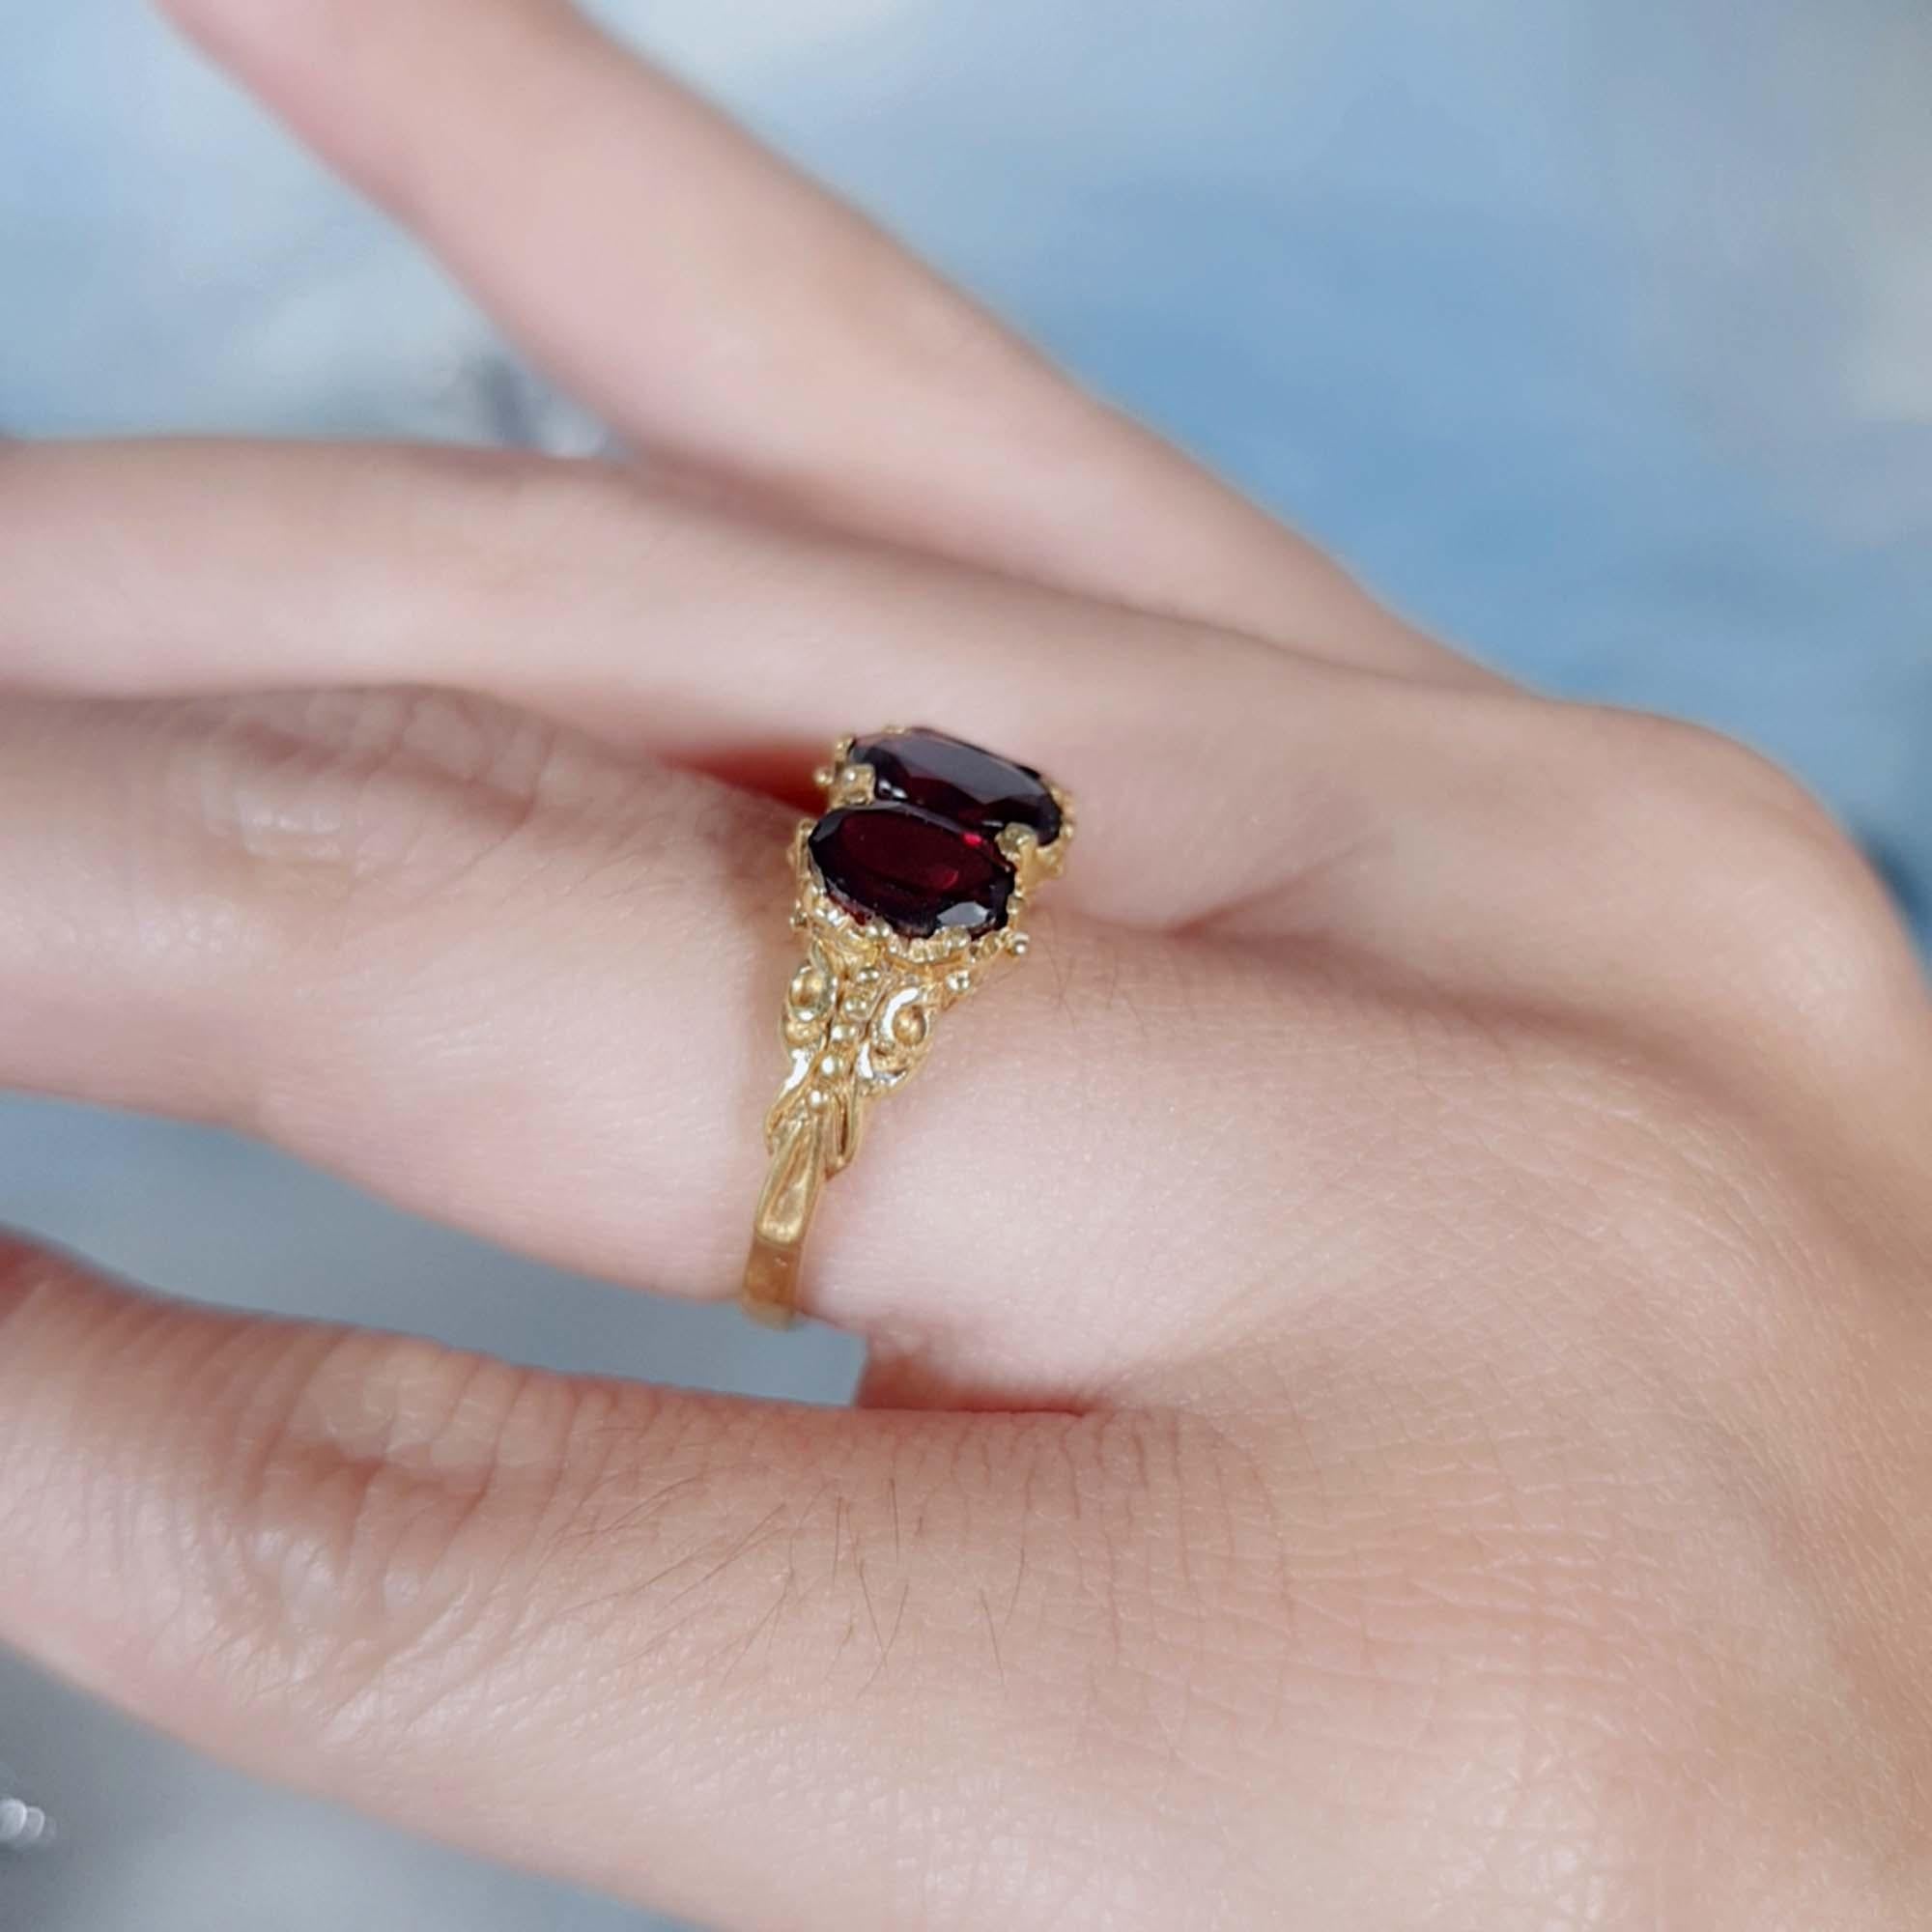 For Sale:  Natural Garnet Vintage Style Three Stone Ring in Solid 9K Gold 9